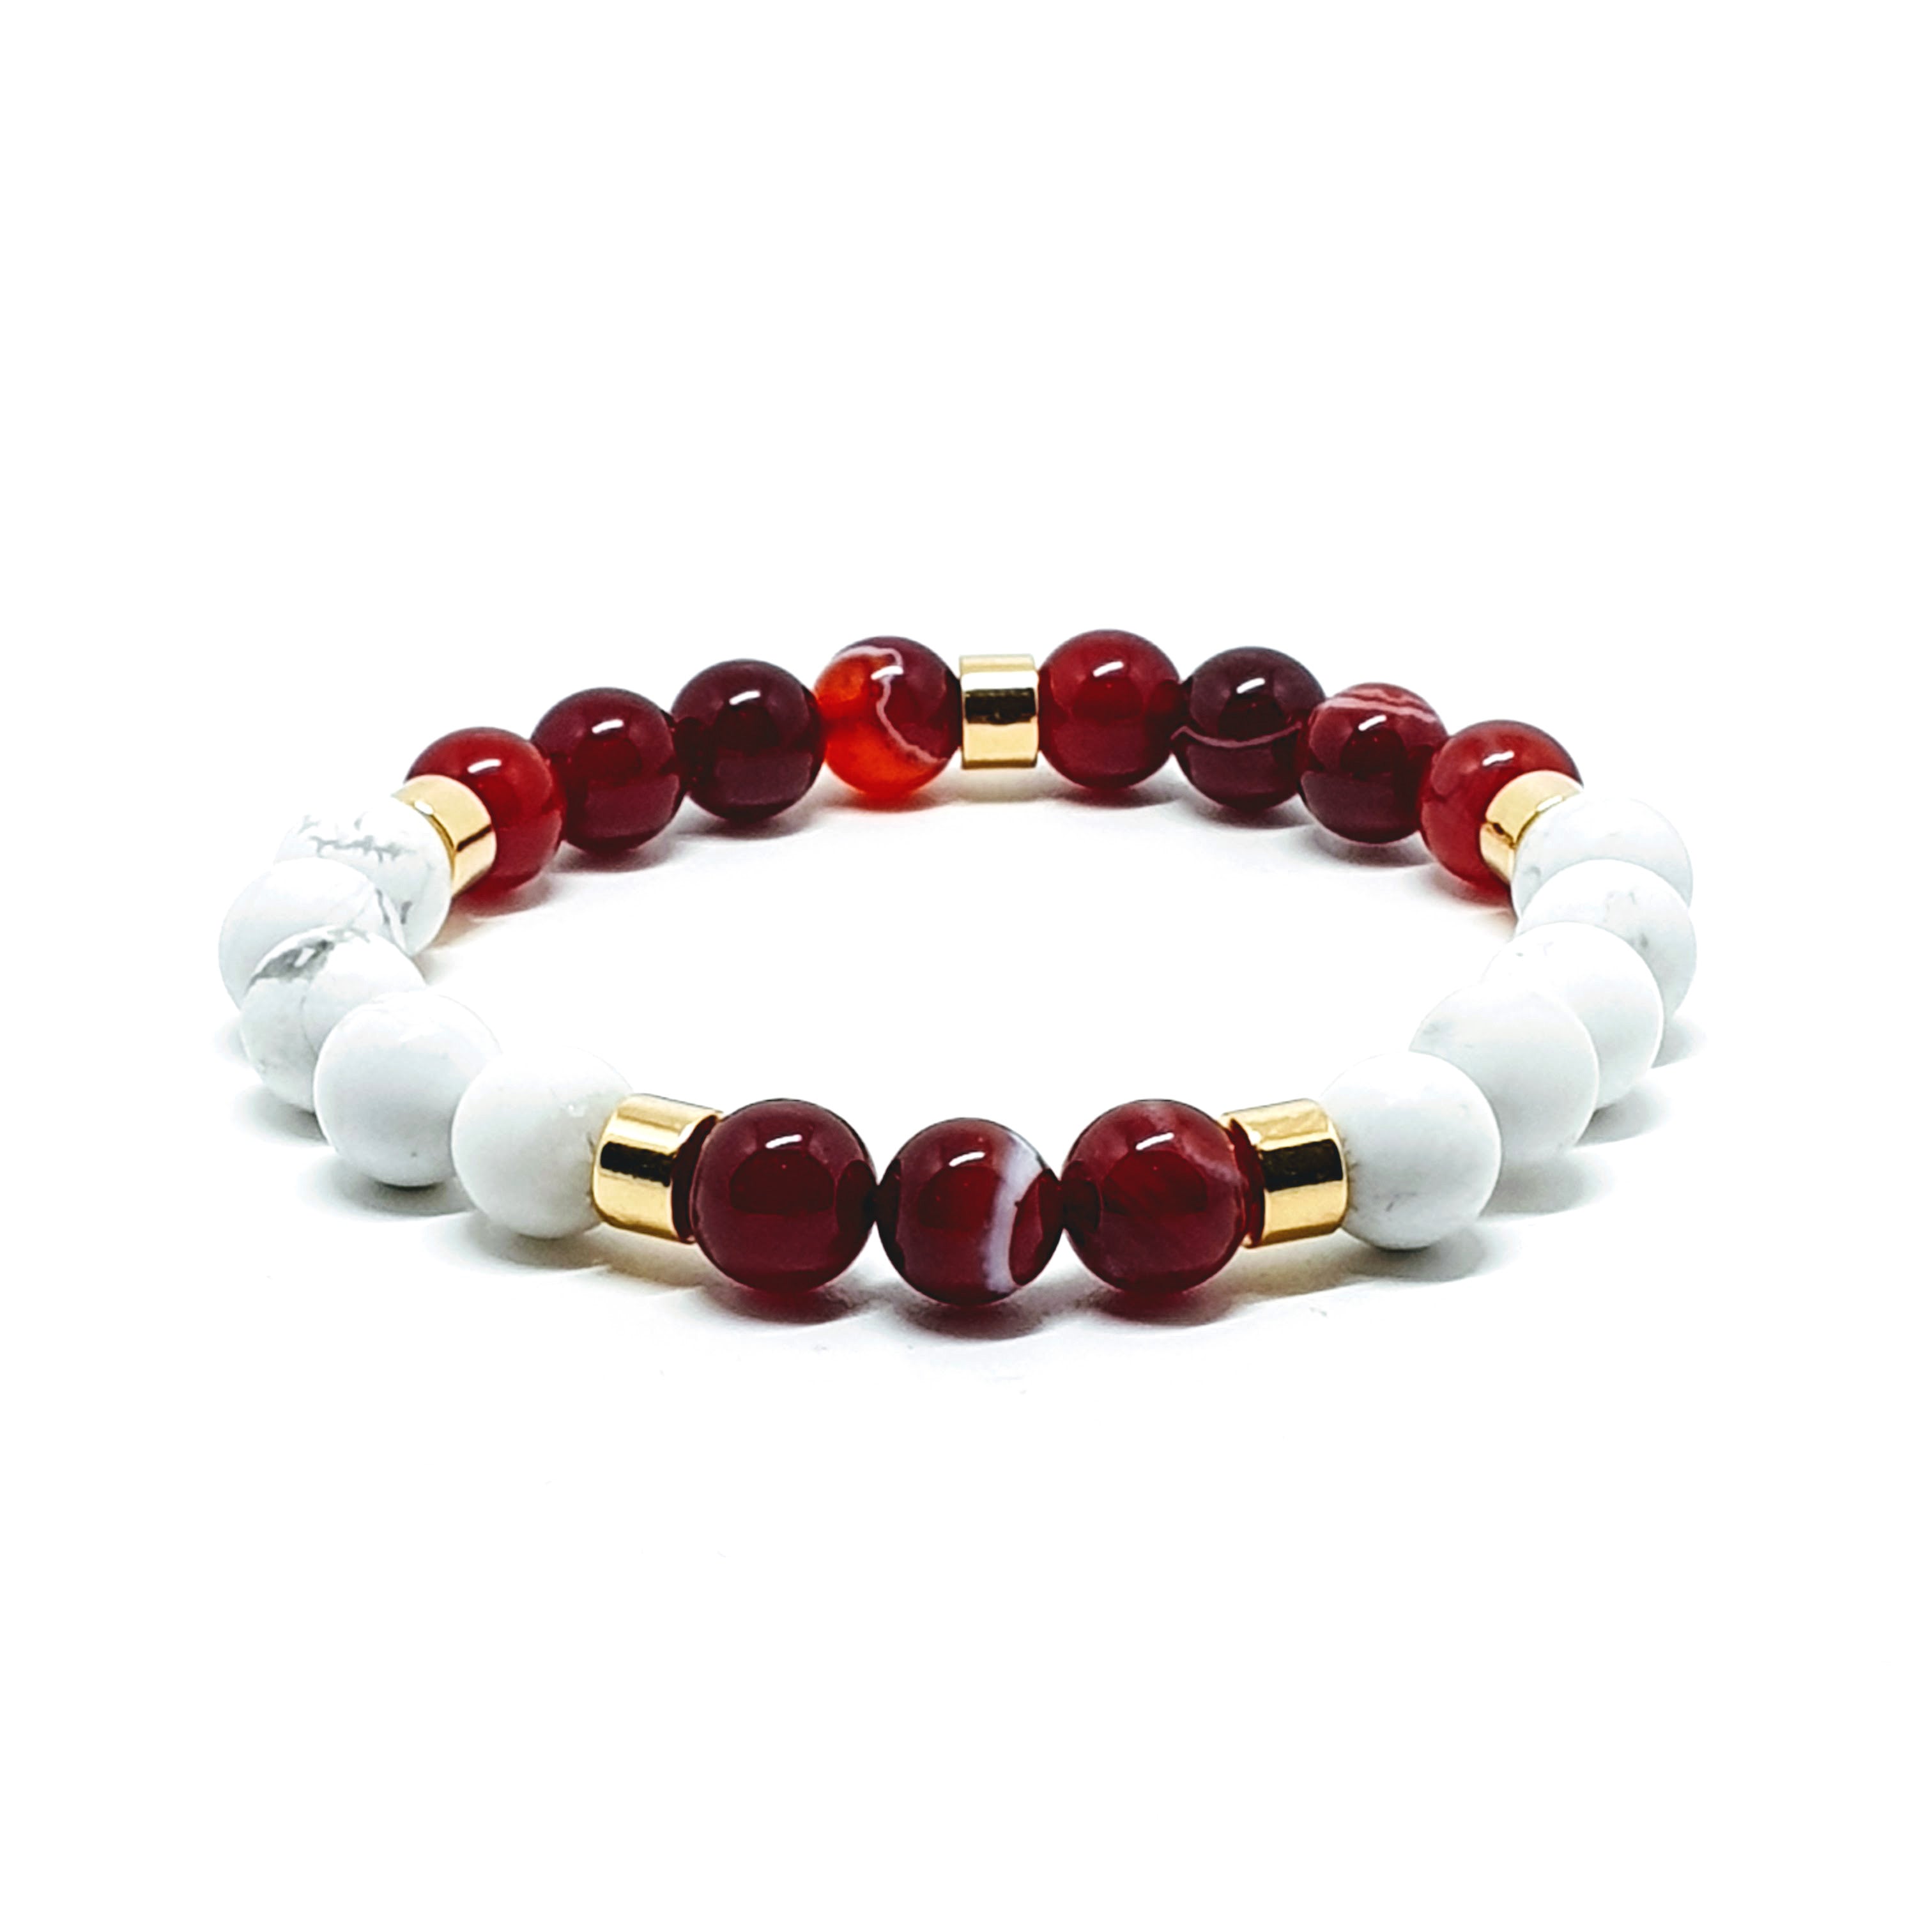 Red Agate and Howlite gemstone bracelet with 18ct gold plated accessories